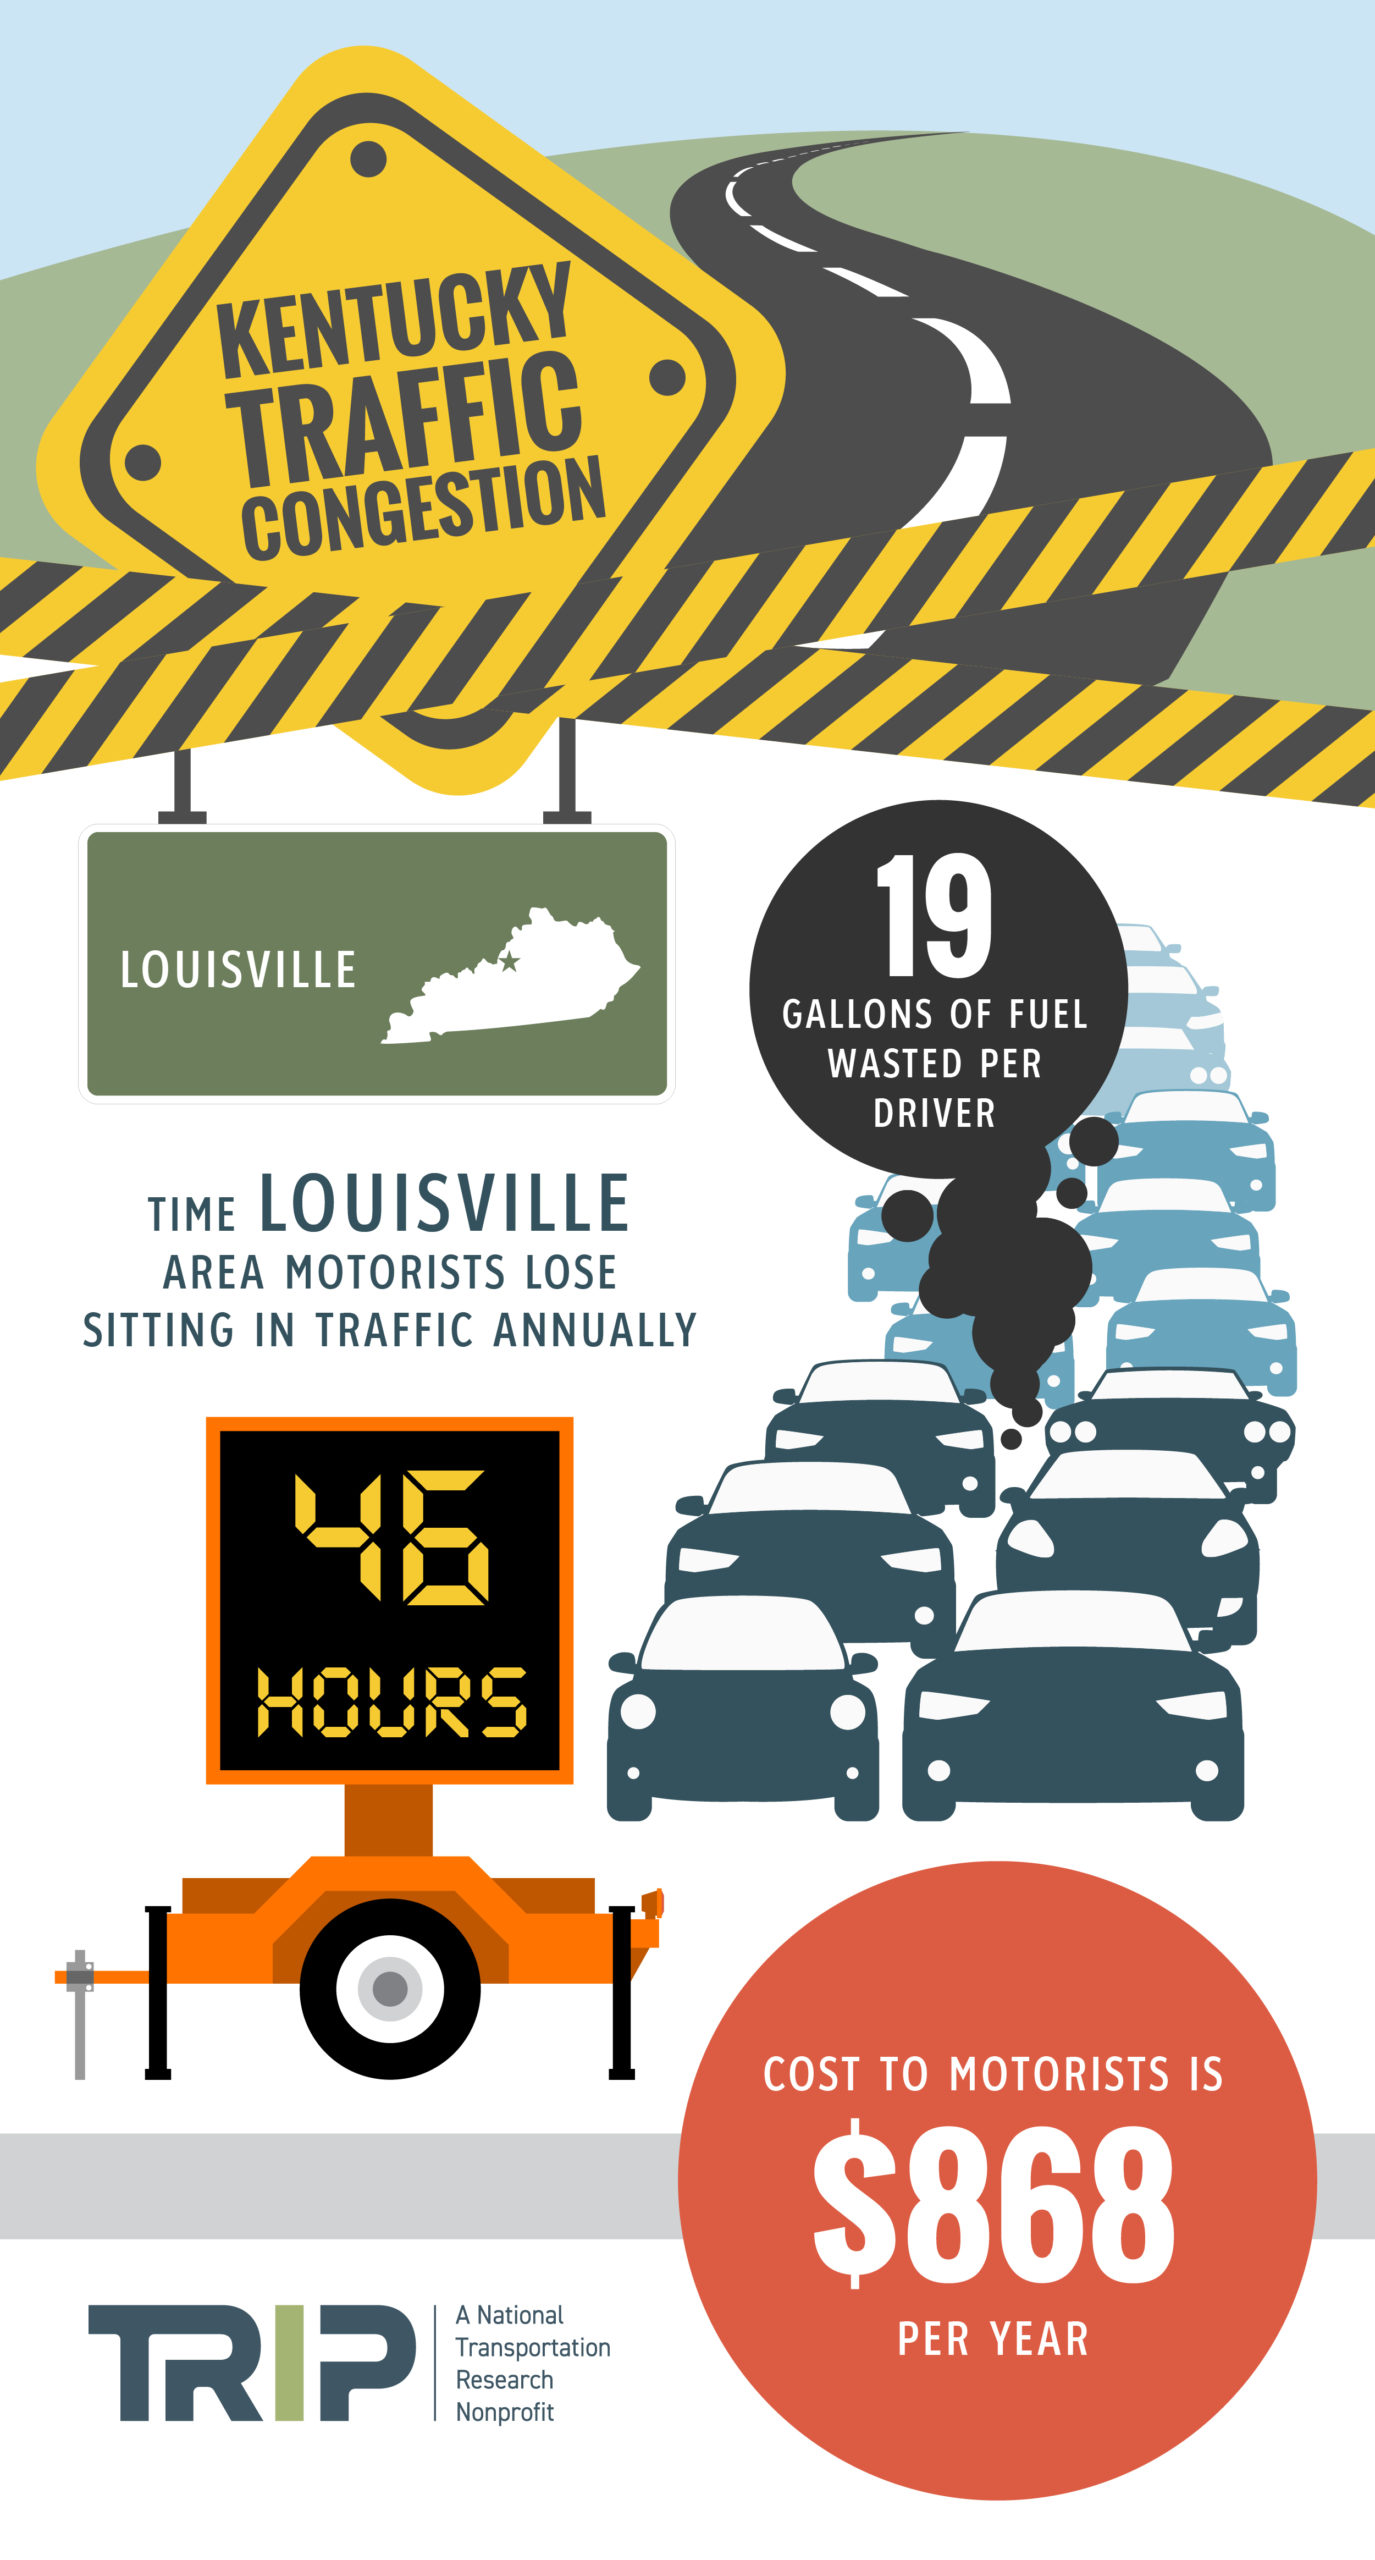 Louisville Traffic Congestion Infographic – February 2022